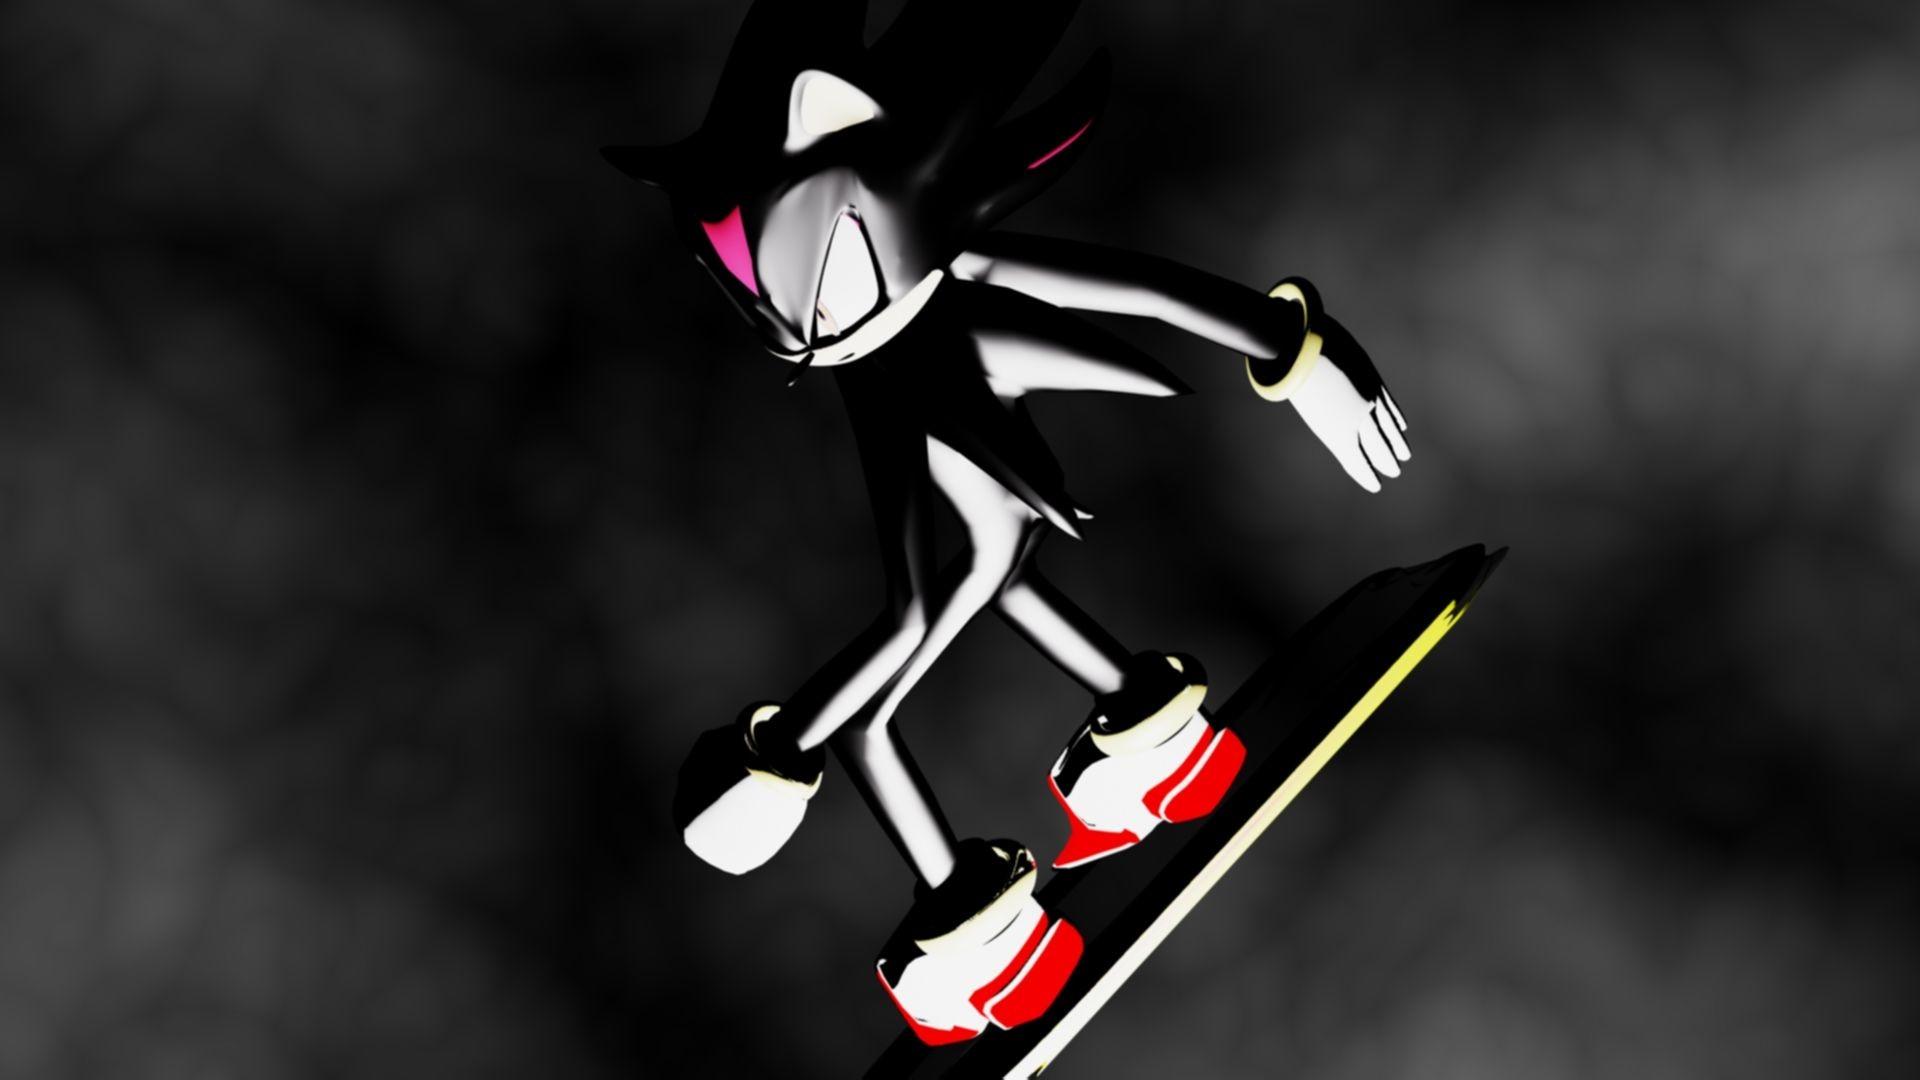 Shadow The Hedgehog Wallpaper background picture